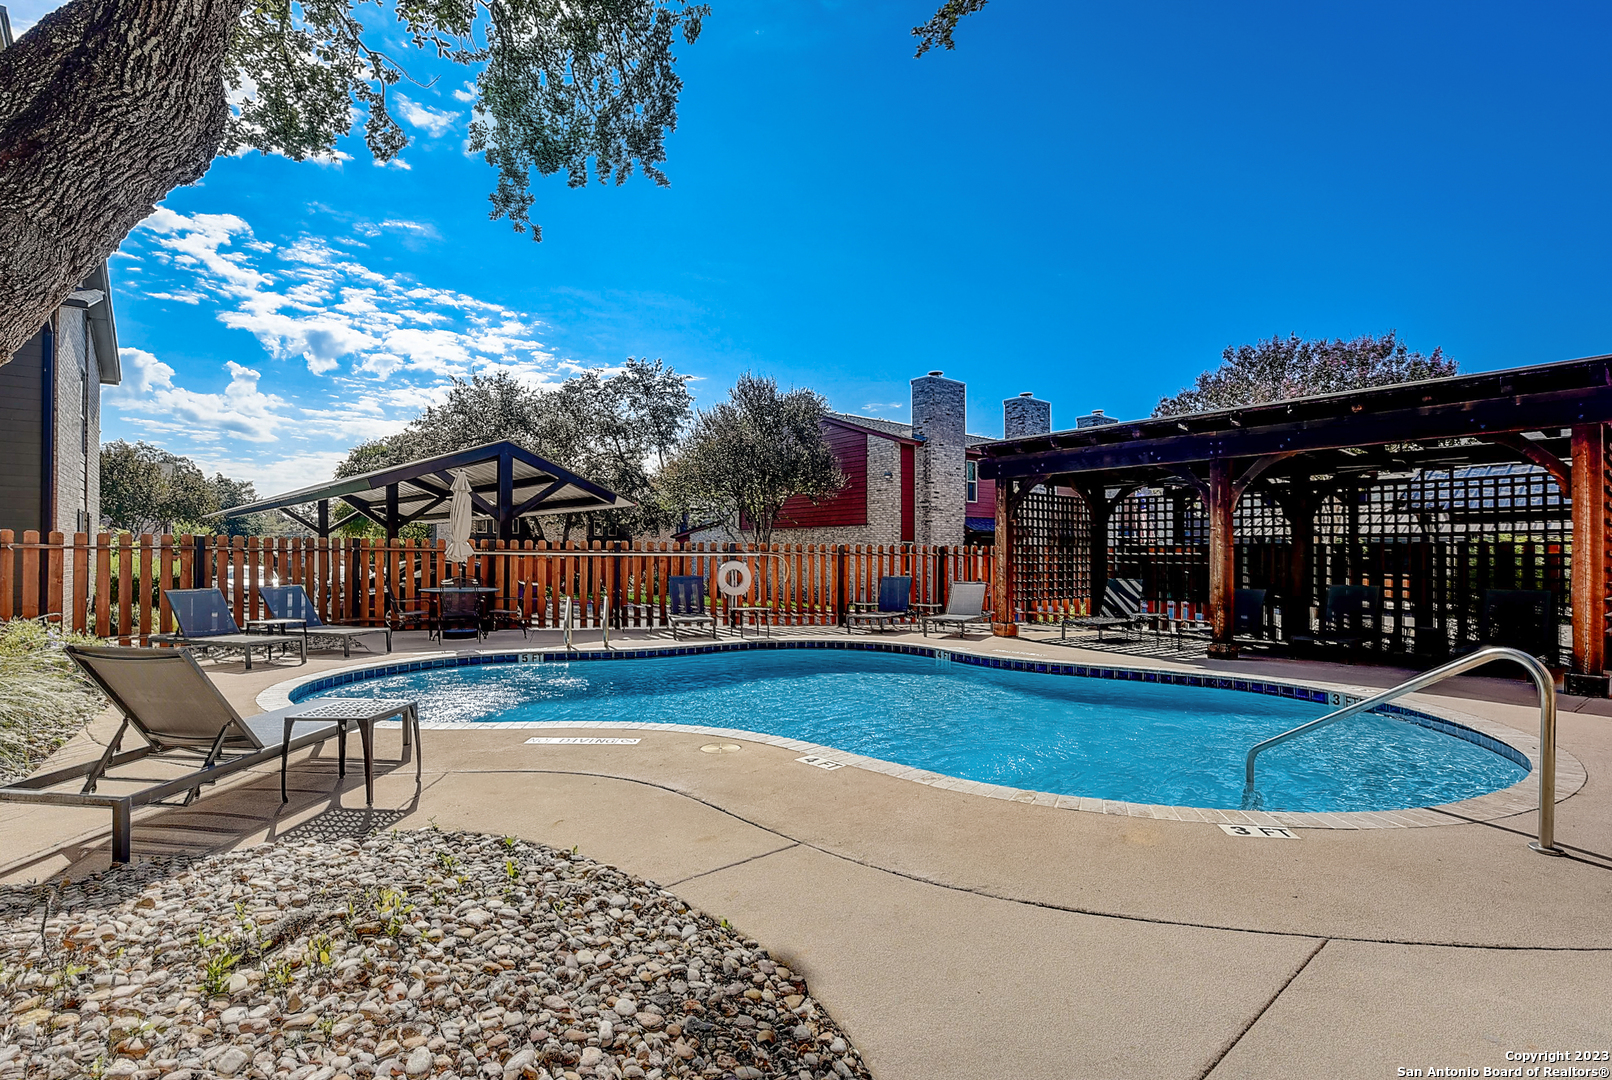 OPEN HOUSE SATURDAY 4/20 from 11A-1P and SUNDAY 4/21 from 12-2pm **SELLER OFFERING INTEREST RATE BUYDOWN WITH PREFERRED LENDER + $5,000 IN CLOSING COST ASSISTANCE** Enjoy modern living in this fully renovated condo in a desirable gated community just minutes from shopping, dining, and major highways. This gem offers the perfect blend of luxury and convenience. Step into a world of impeccable finishes, from quartz counters, designer light fixtures, stainless steel Whirlpool kitchen appliances, low flow plumbing fixtures and more. Primary suite with a full bath features a gorgeous tiled shower and dual vanities. Vinyl plank flooring in all the main living areas for easy maintenance. Utility closet with a new washer and dryer will convey at closing.  New owners will also appreciate the $1M+ exterior renovation that includes all new roofs, new windows, new HVAC units, gates, landscaping, hardscaping, exterior security cameras, covered parking space, resurfaced pool with a pergola and small community yard. Other units and floor plans available upon request.  Same day showings available.